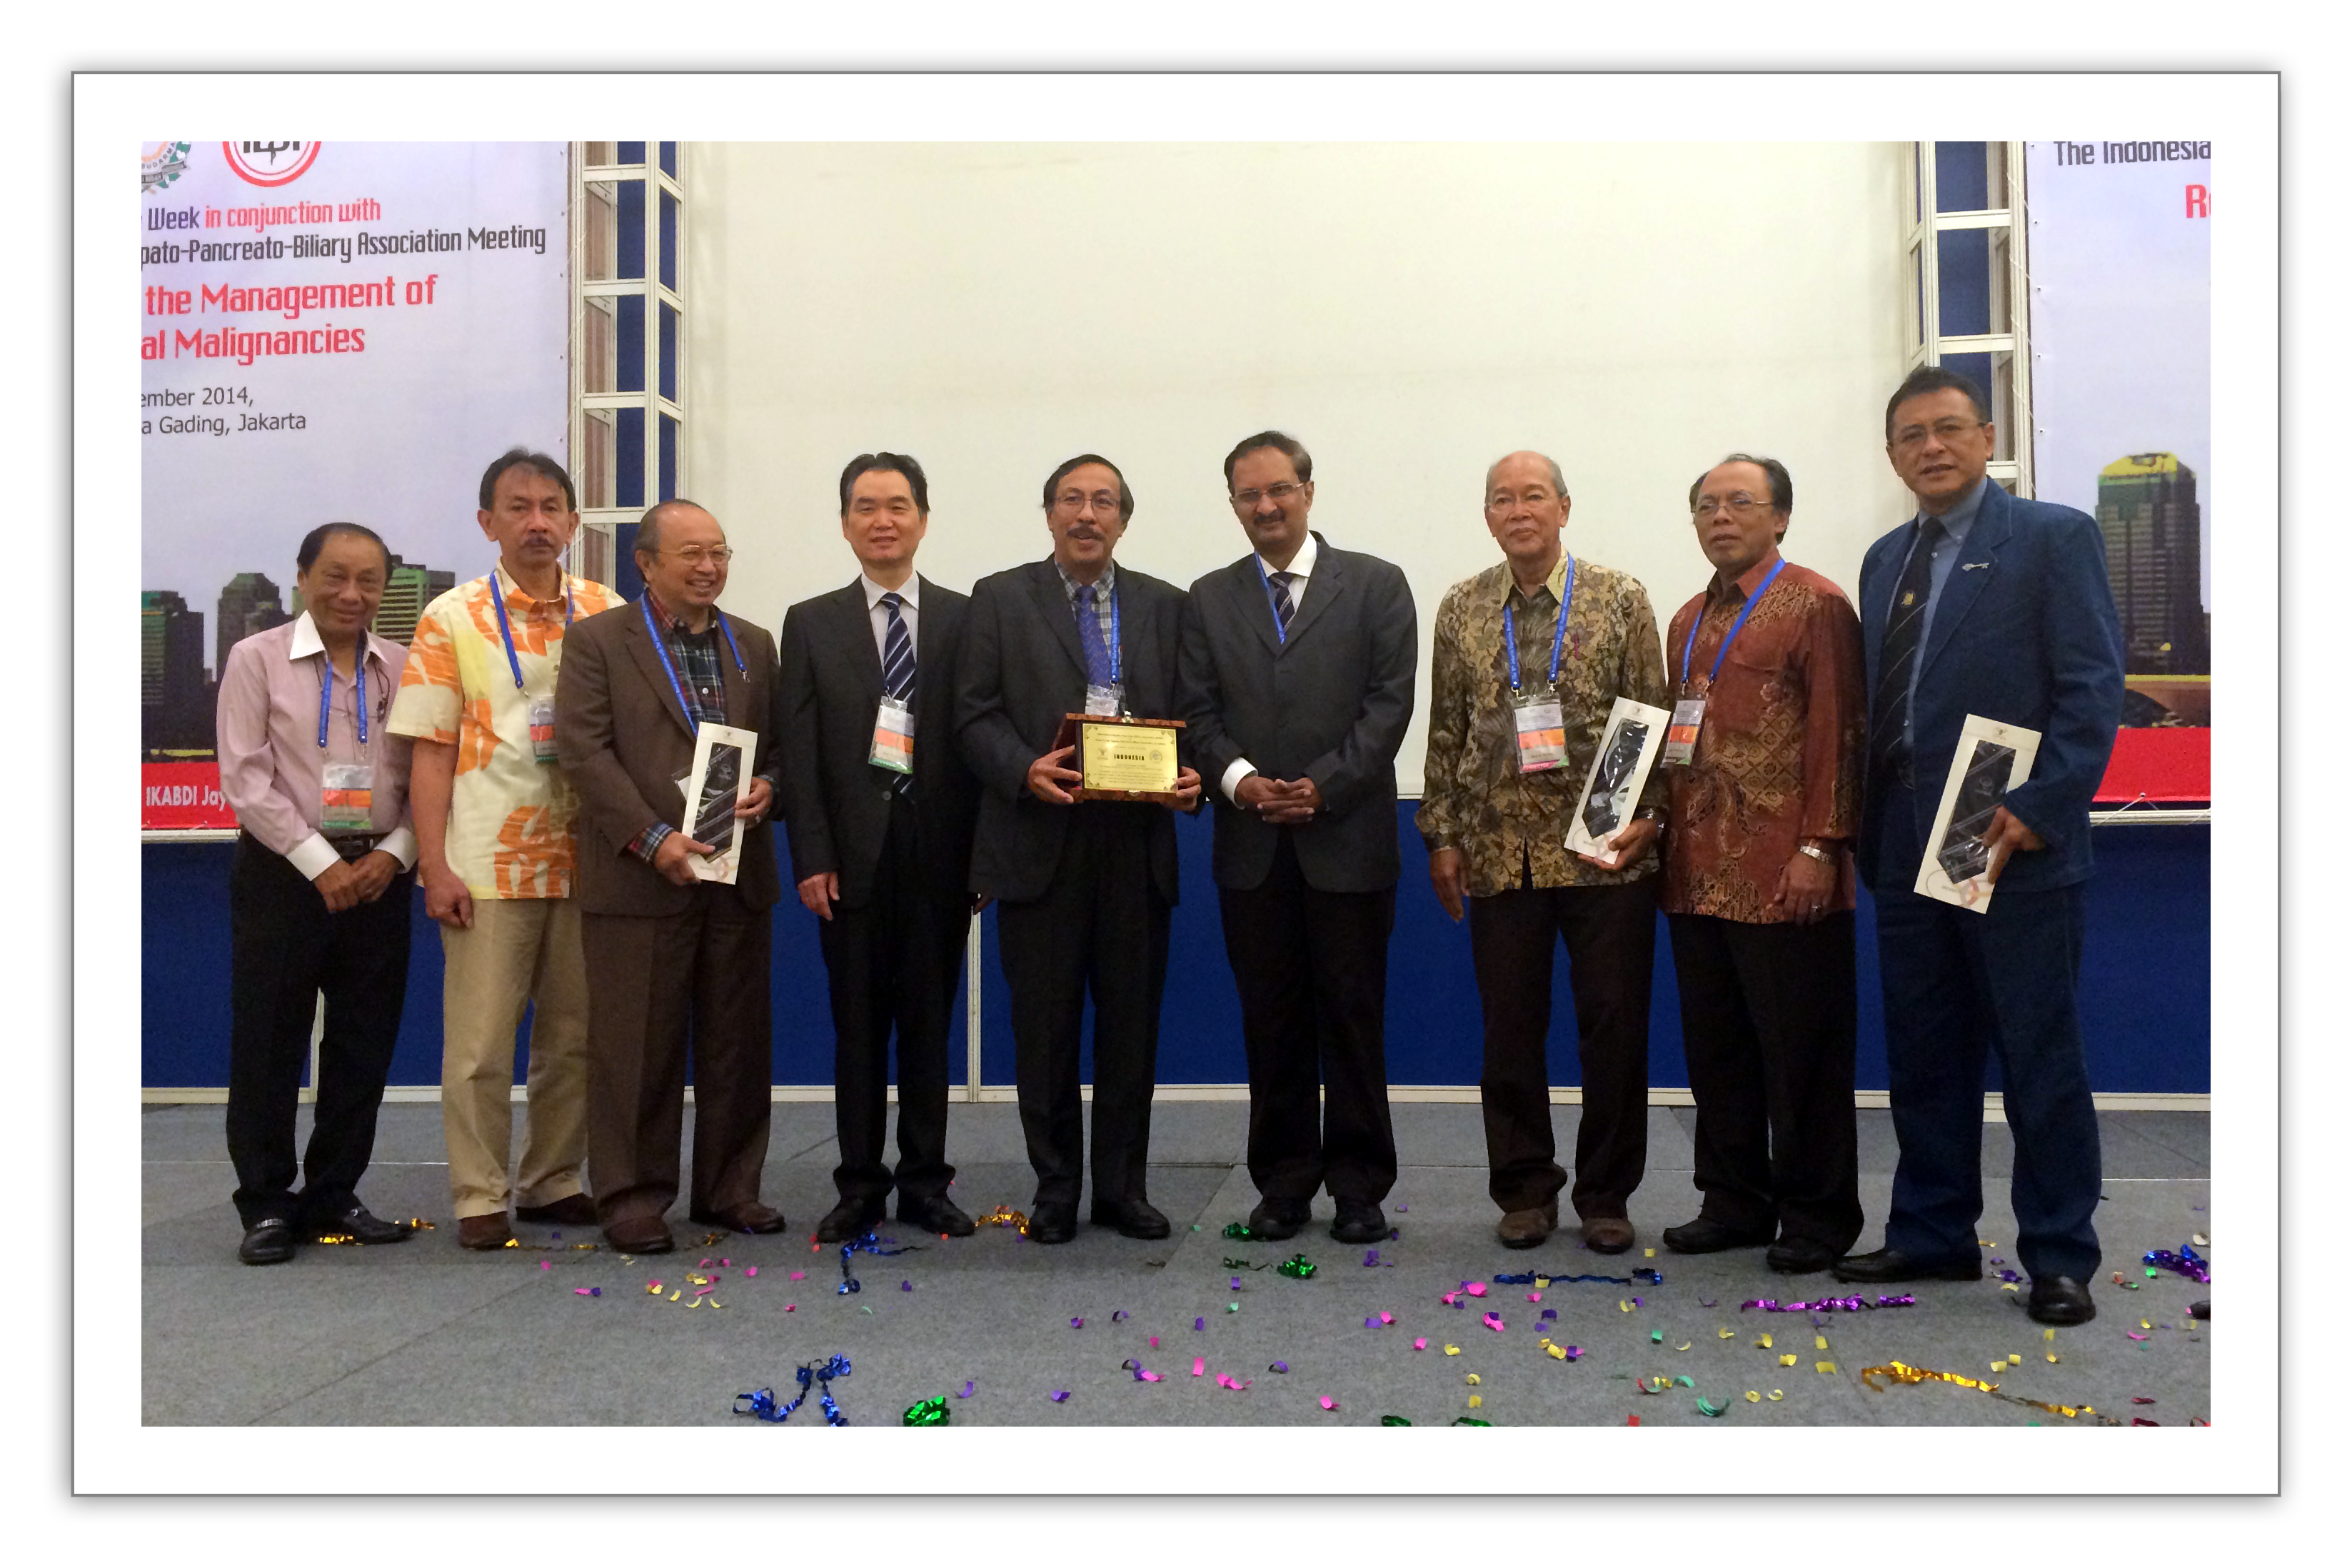 Launch of the IHPBA Indonesian National Chapter